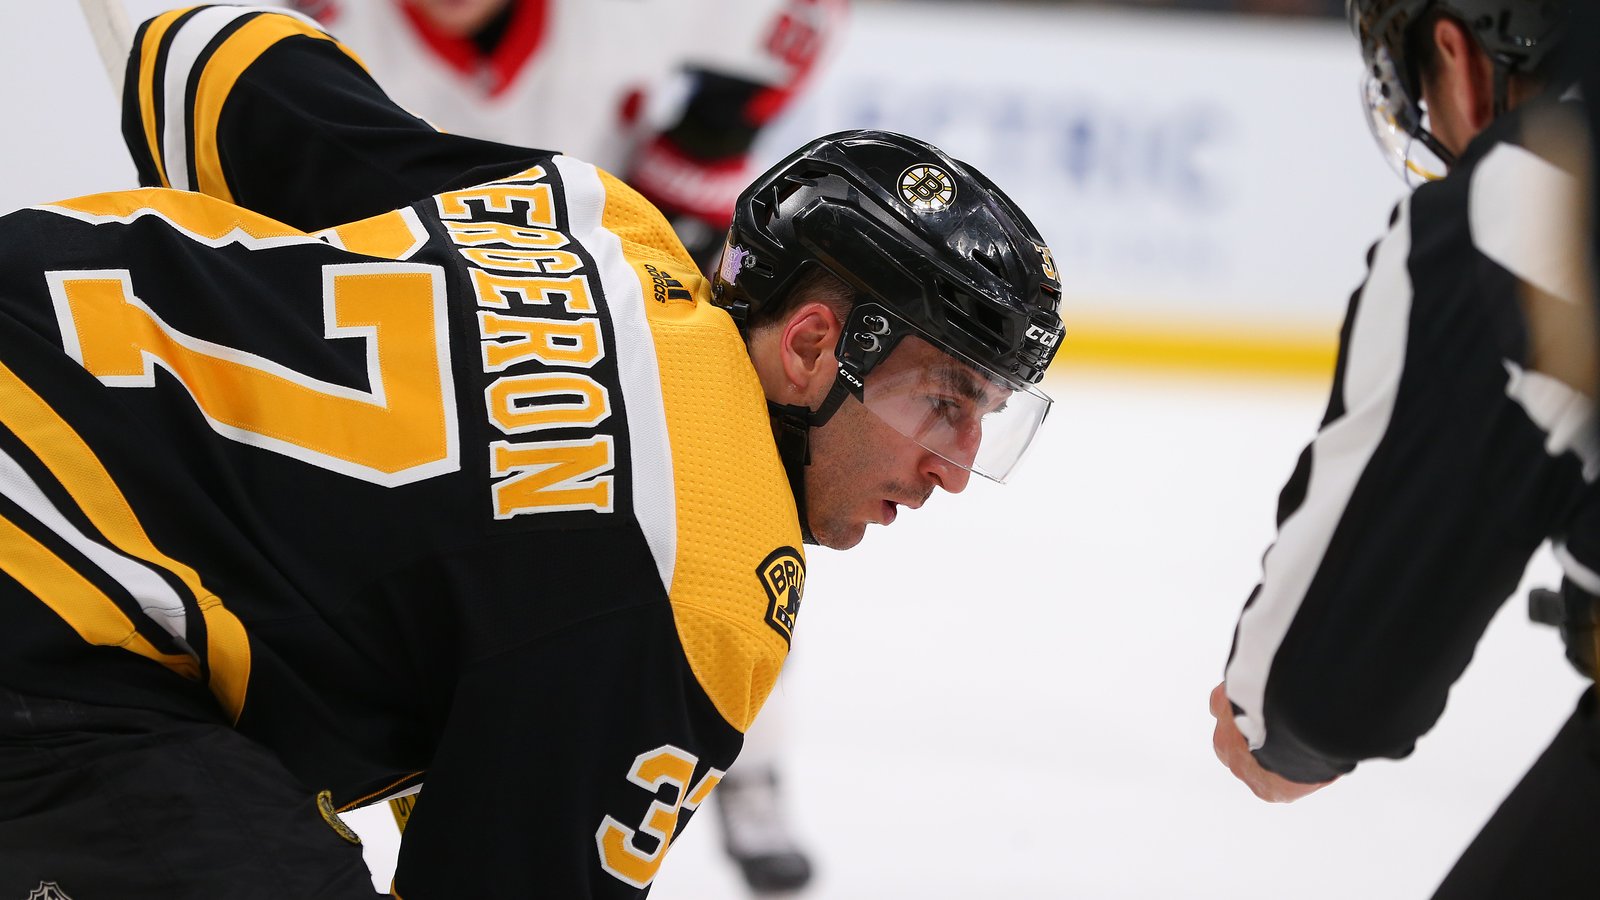 Huge blow for Boston as Bergeron is sidelined with an injury